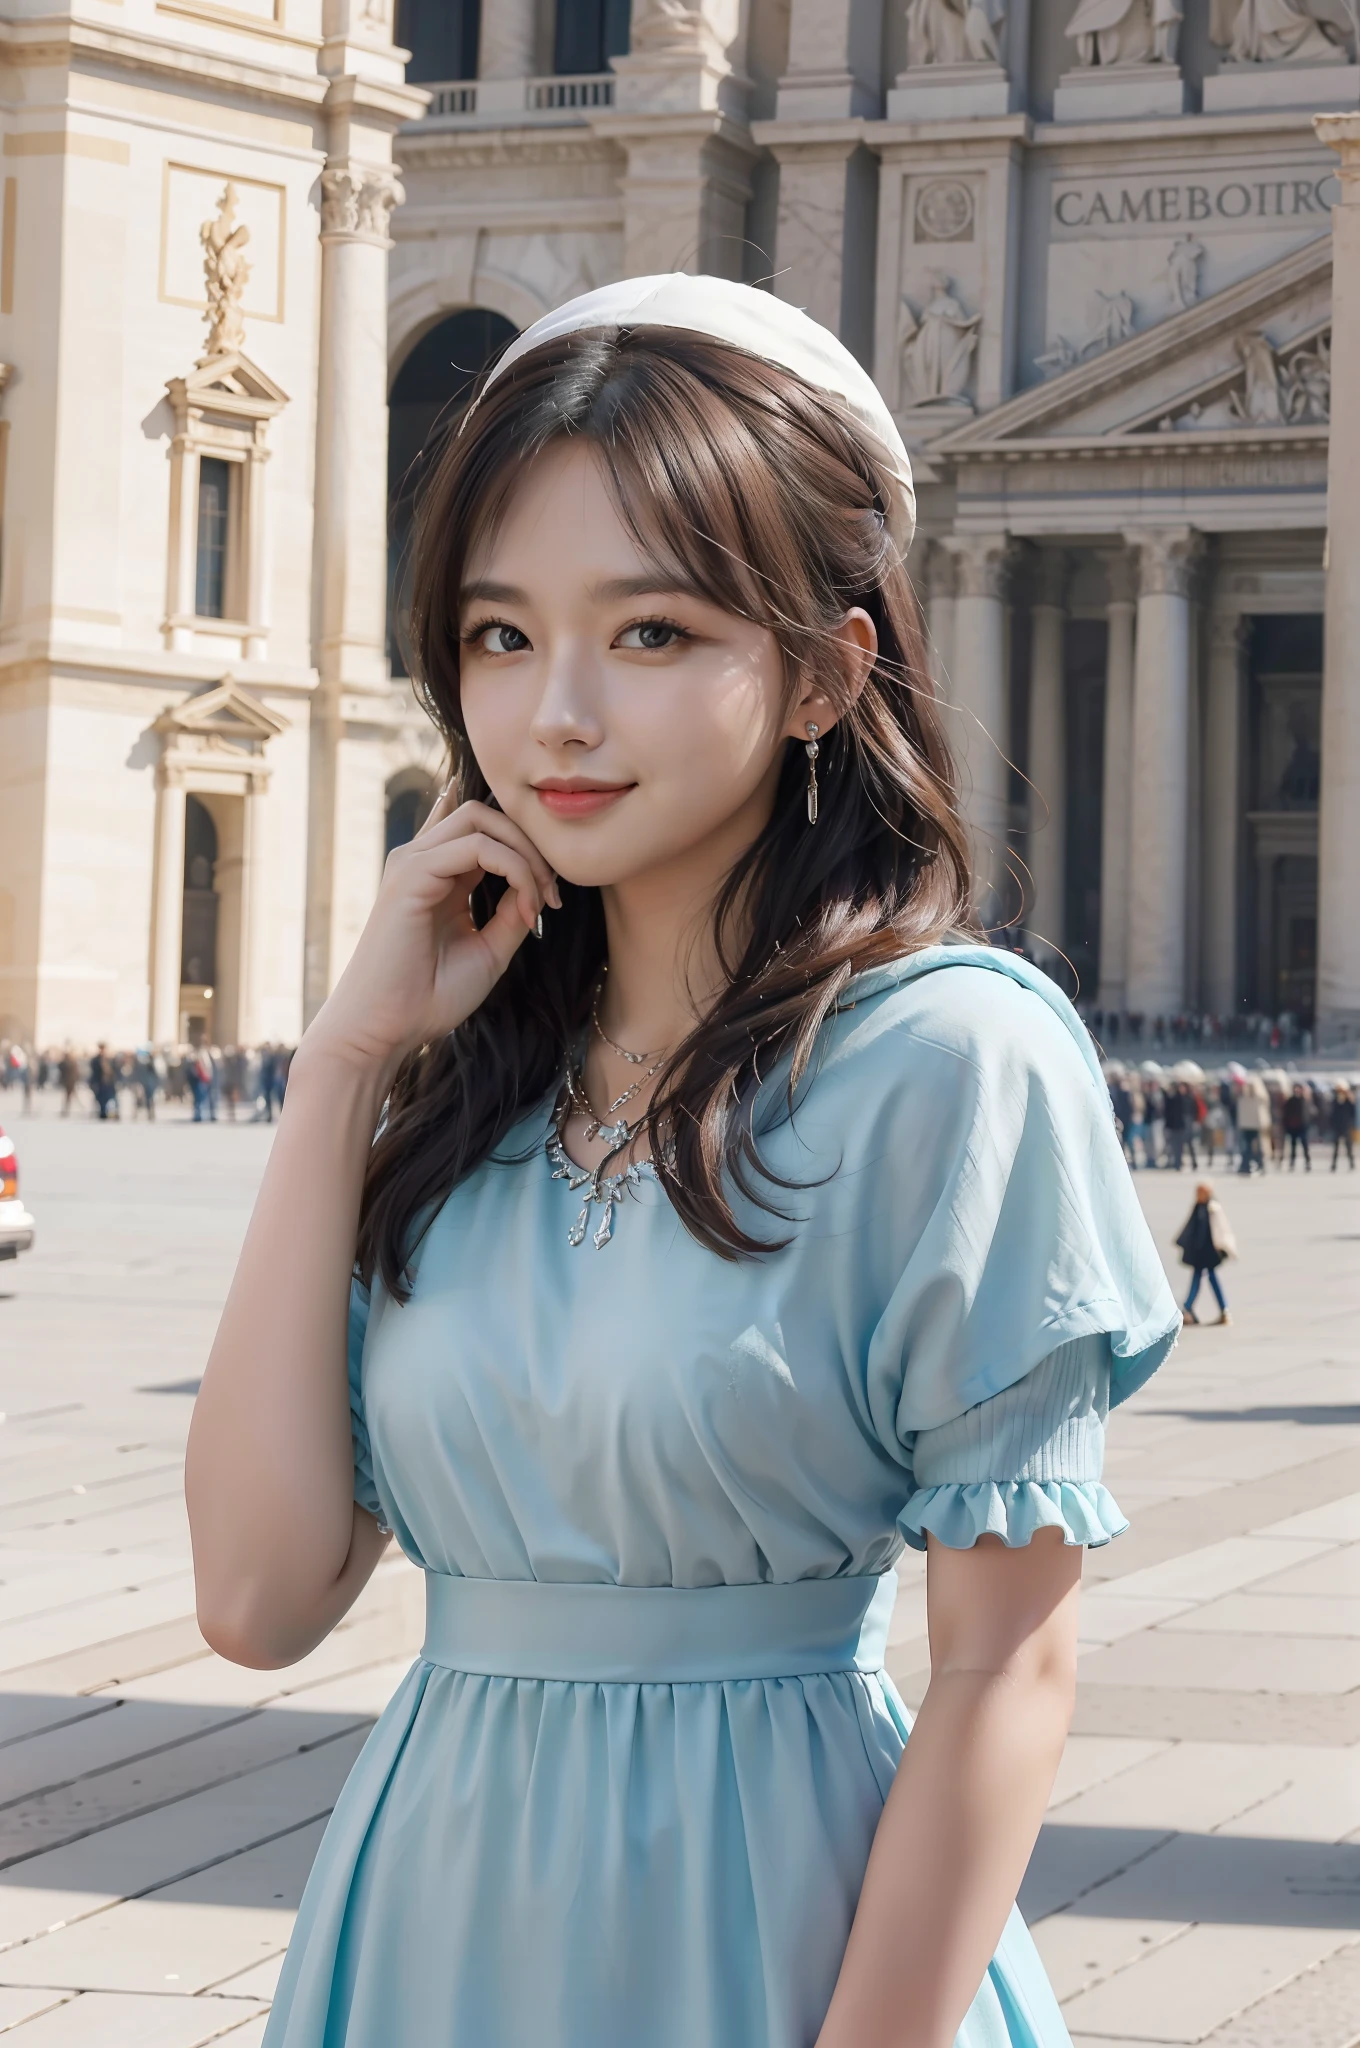 Masterpiece, 4K, Best quality, FELute, necklace,Gorgeous dress, (on the St. Peter's Square of Vatican,crowd of),Bracers, Cowboy shot, lookatthe viewer, Smirk, Hand up